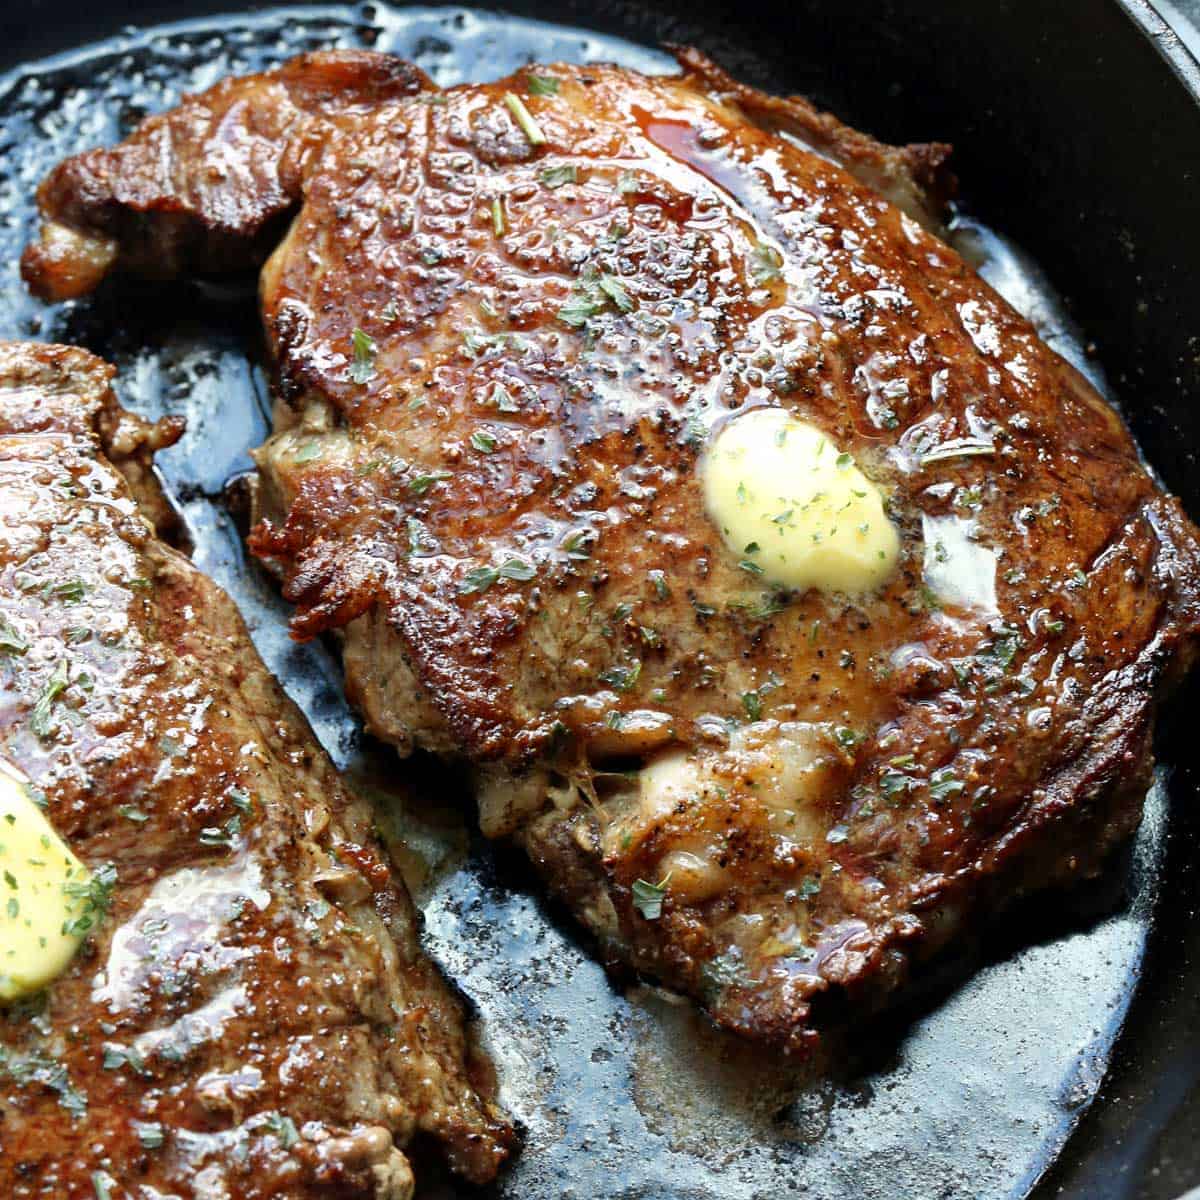 Easy & Juicy Cast Iron Steak Recipe (Made In Just 15 Minutes)